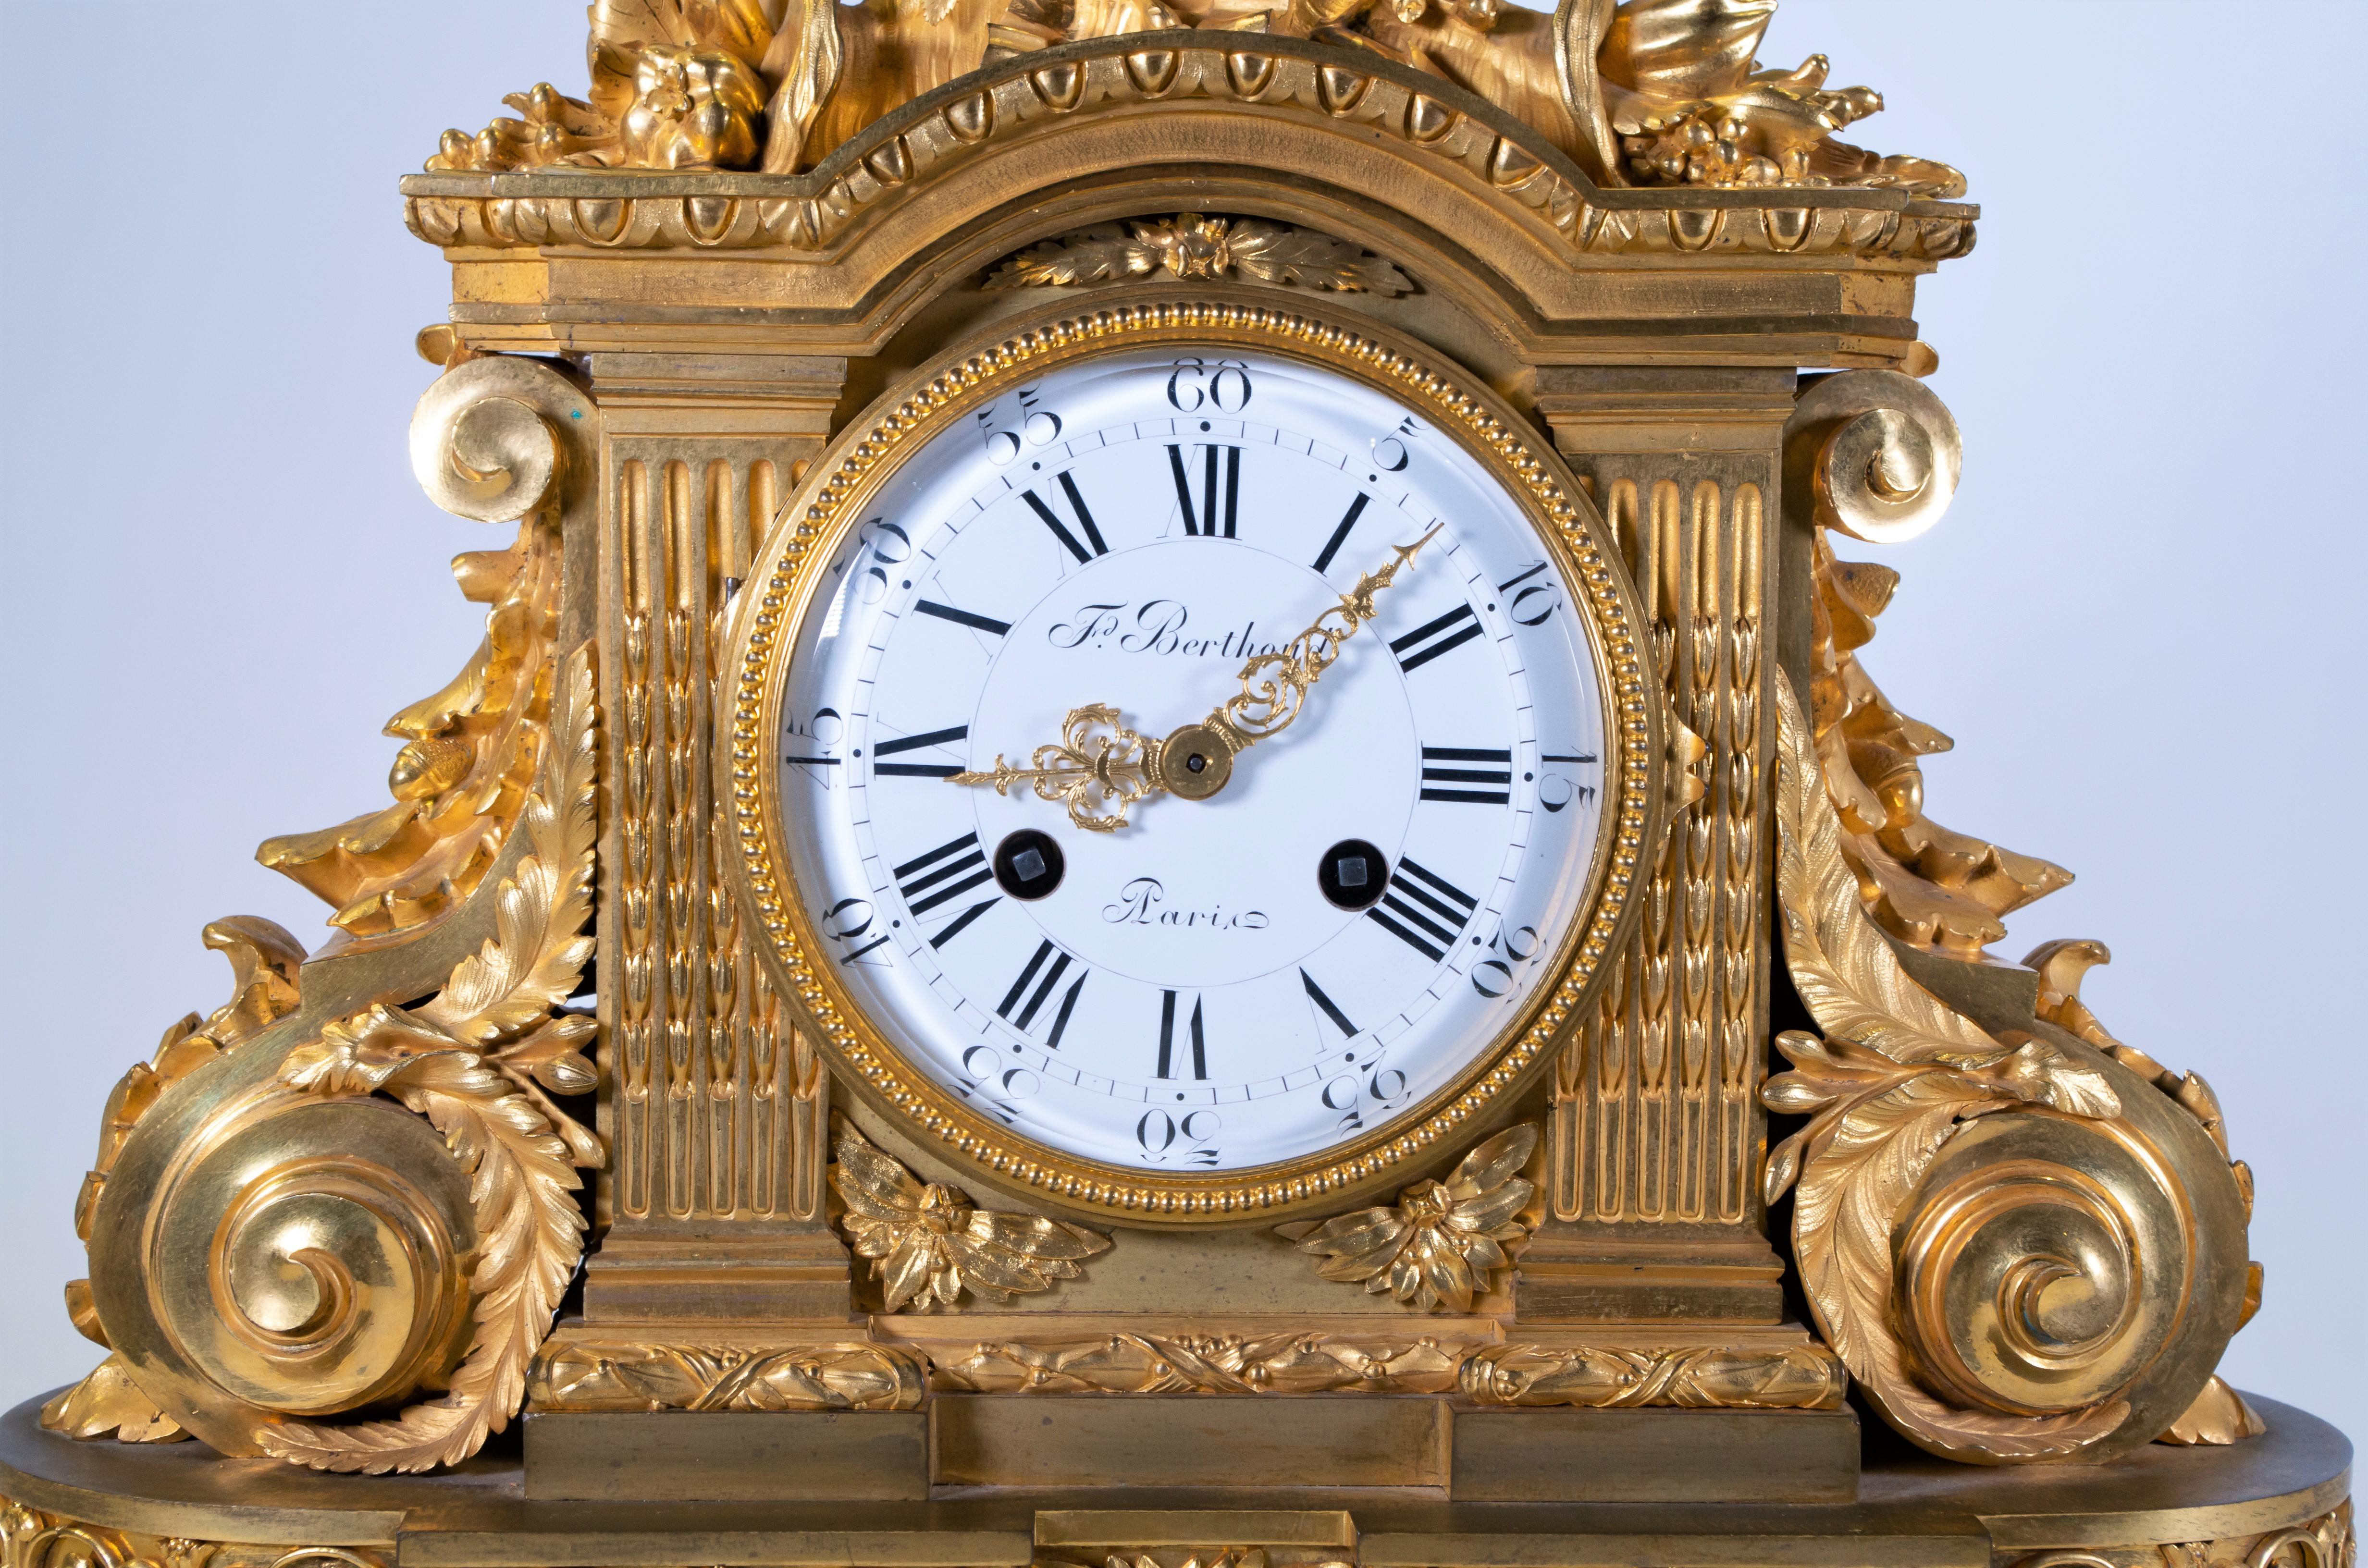 A fabulous and quite important 18th century Louis XVI period Carrara marble and dore bronze mantle clock, signed F. Berthoud, Paris. The body of the clock is exceptionally cast and further hand-chiseled, chased, matted, and burnished in two-tone